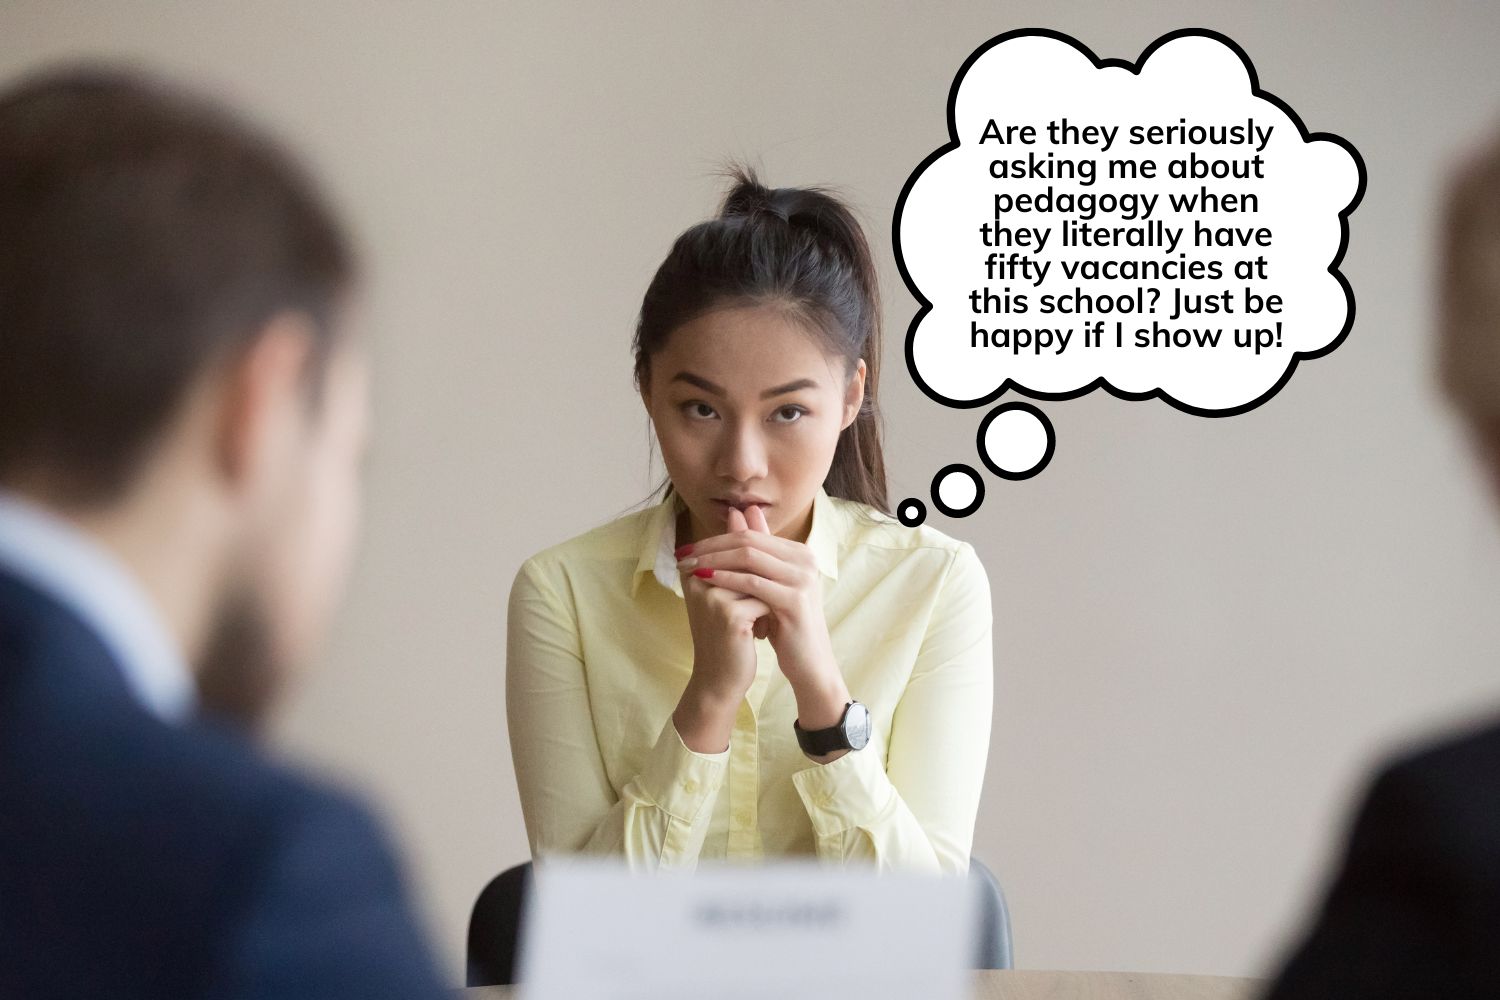 A woman interviewing for a teaching job looks exasperated by the exhaustive questions from a poorly run administration.